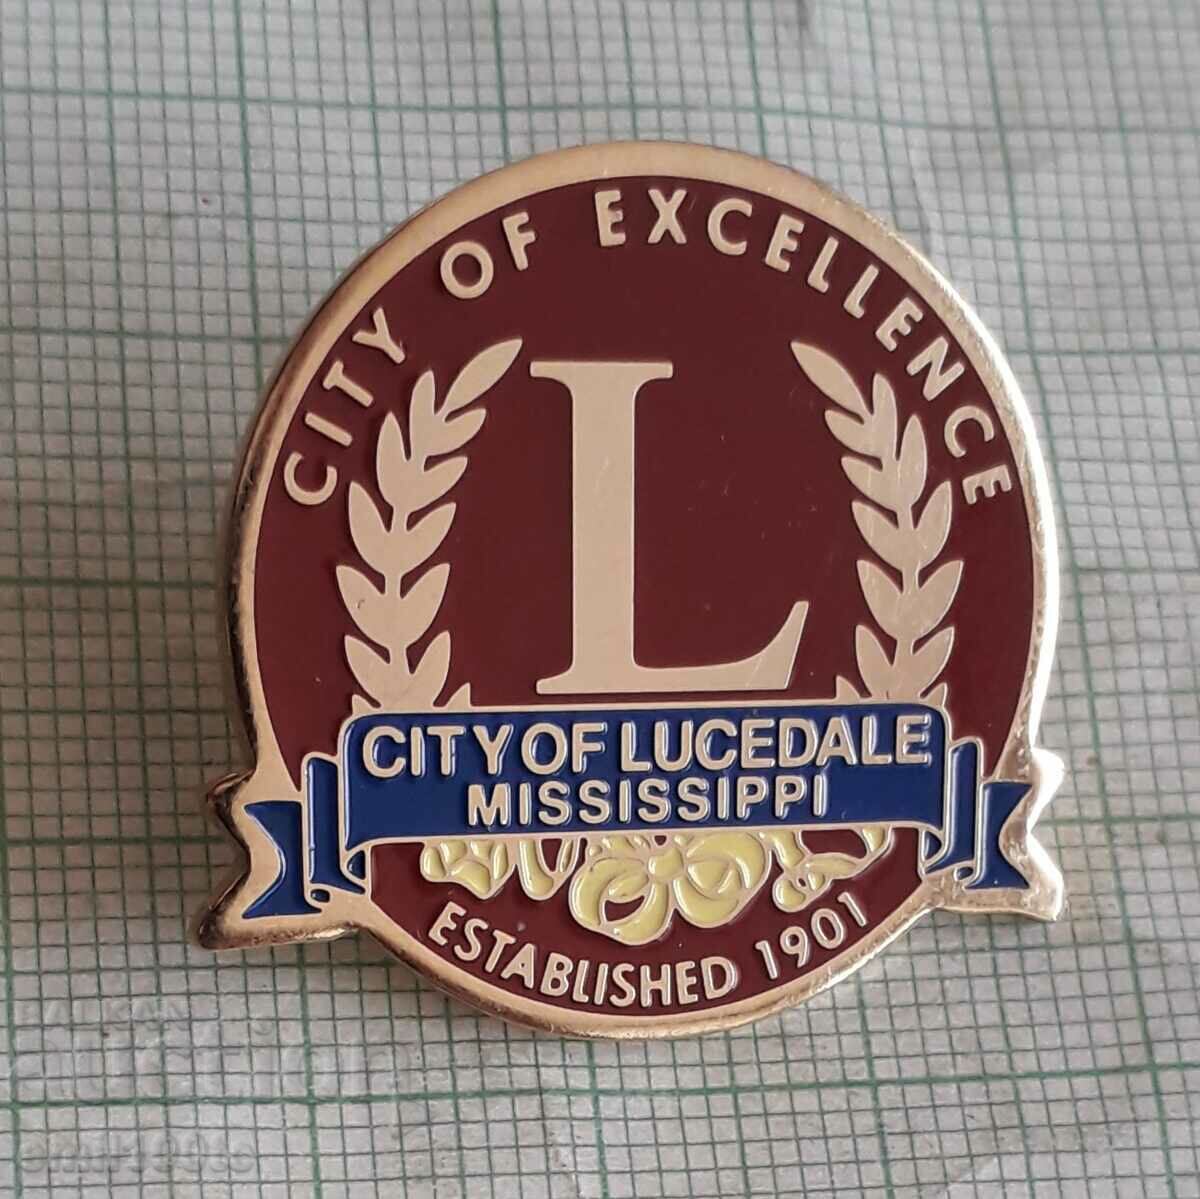 Значка- City of LUCEDALE Mississippi City of EXCELLENCE 1901